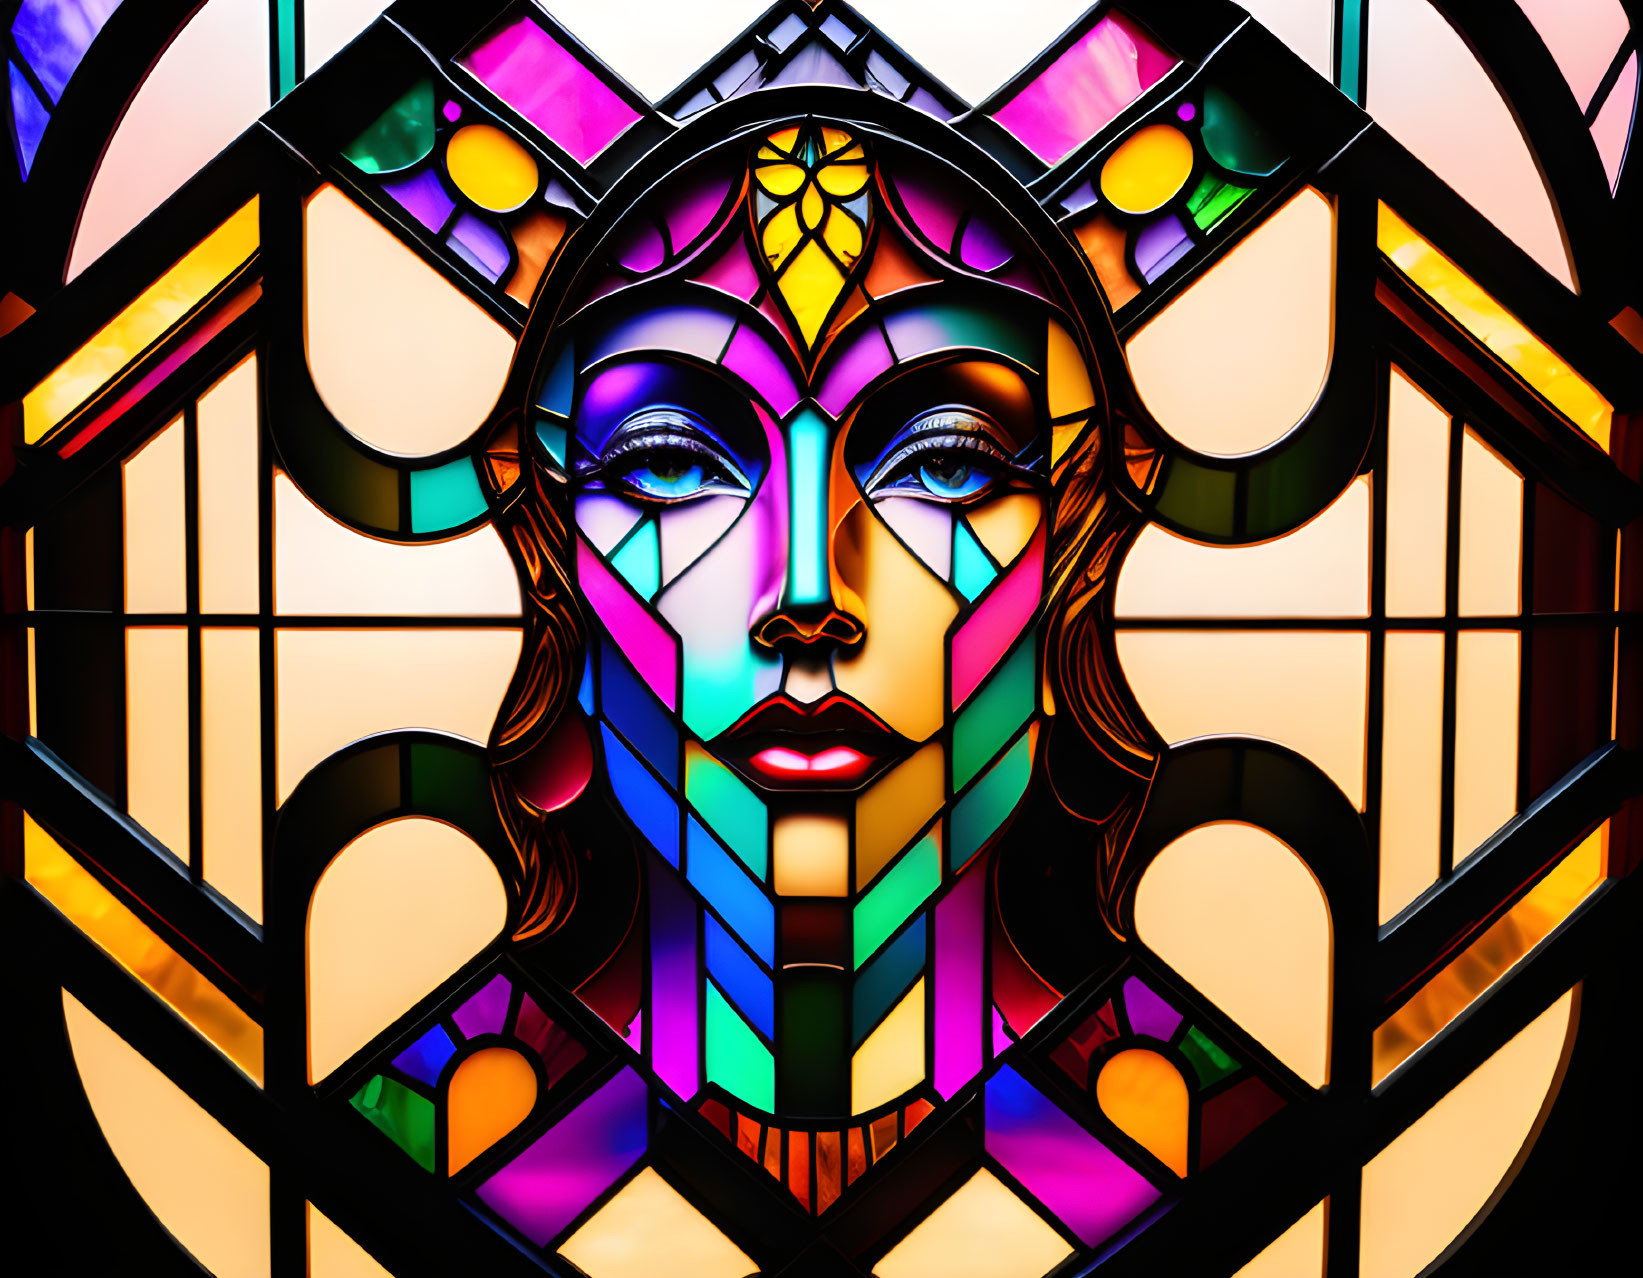 Abstract Female Face Stained Glass Artwork with Symmetrical Patterns